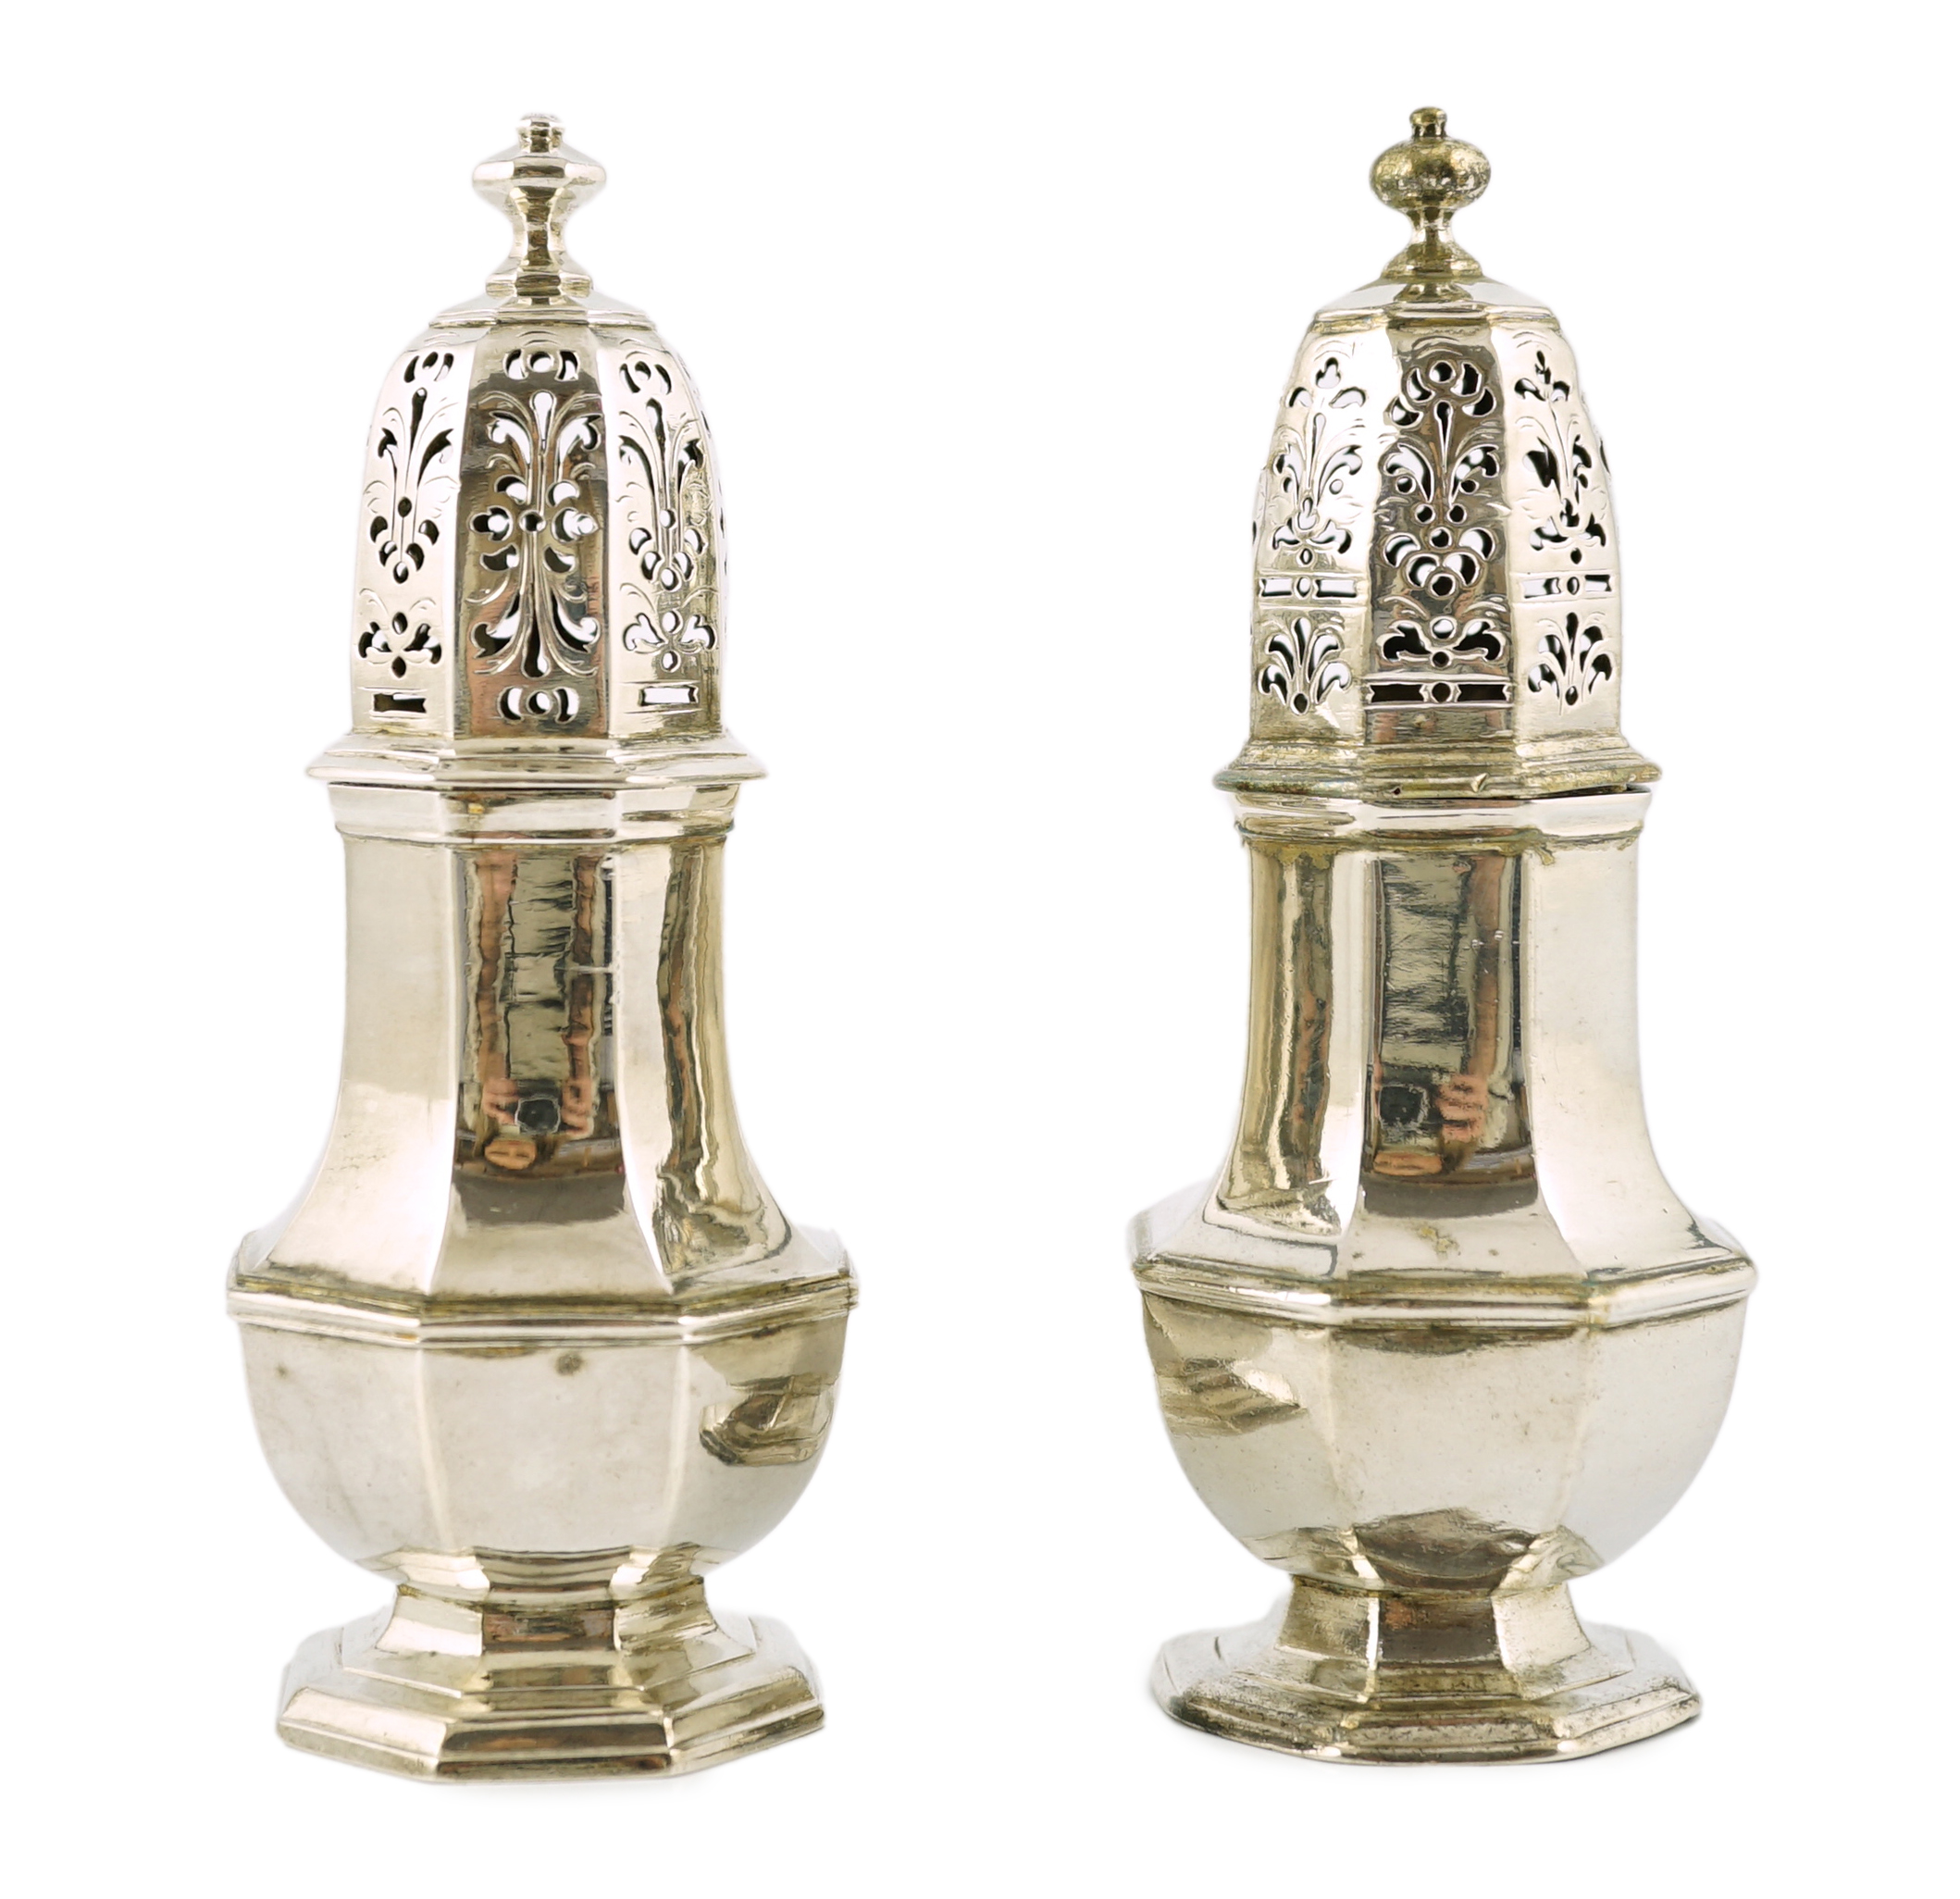 A near pair of George I/George II silver octagonal baluster casters